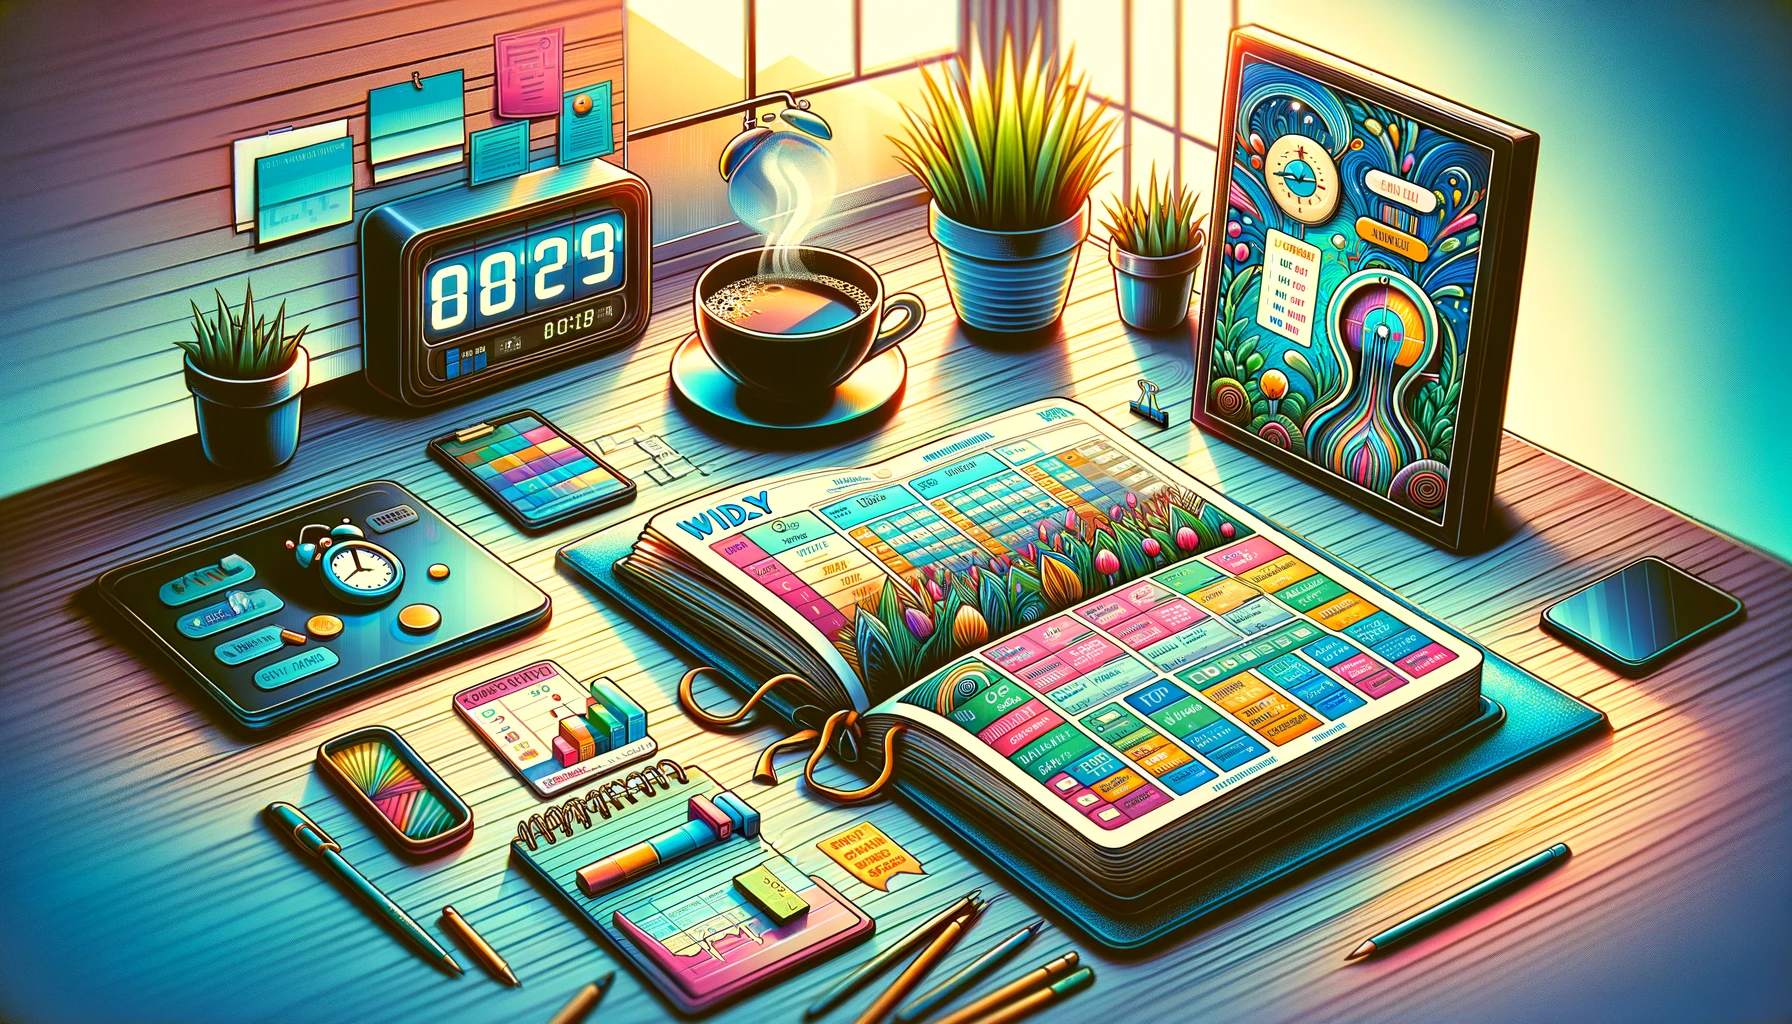 Artistic depiction of a peaceful office workspace with a daily planner organized into time blocks, a digital clock showing an early morning hour, a cup of coffee, and a small plant. This image represents time management for entrepreneurs, emphasizing productivity strategies and entrepreneur efficiency in a structured and motivational environment.